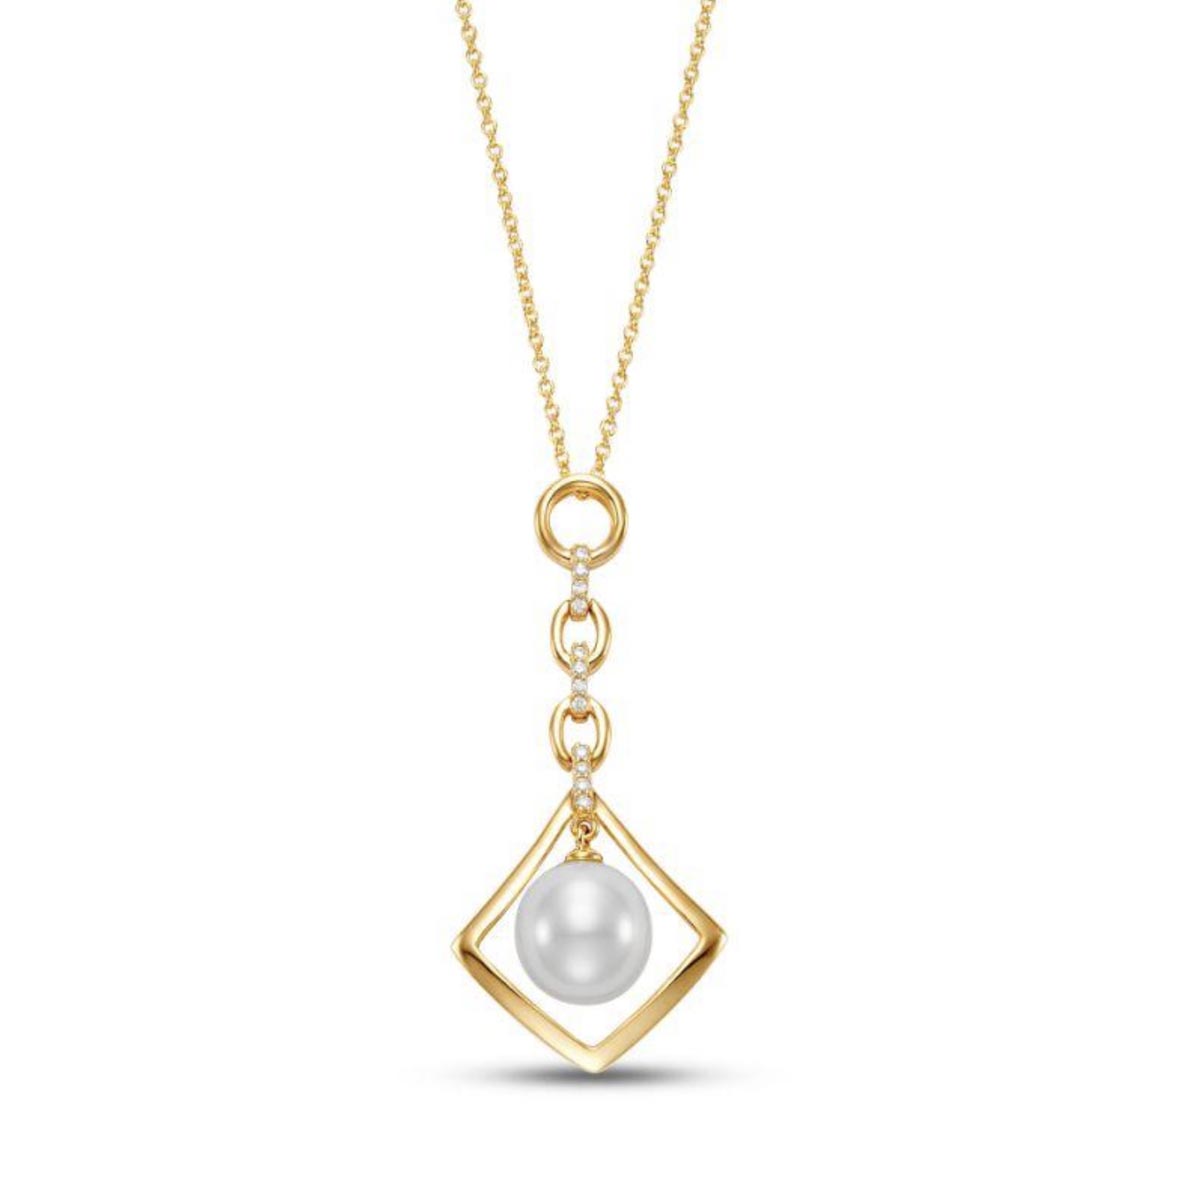 Mastoloni Cultured Freshwater Pearl Necklace in 18kt Yellow Gold with Diamonds (9-9.5mm pearl and .05ct tw)